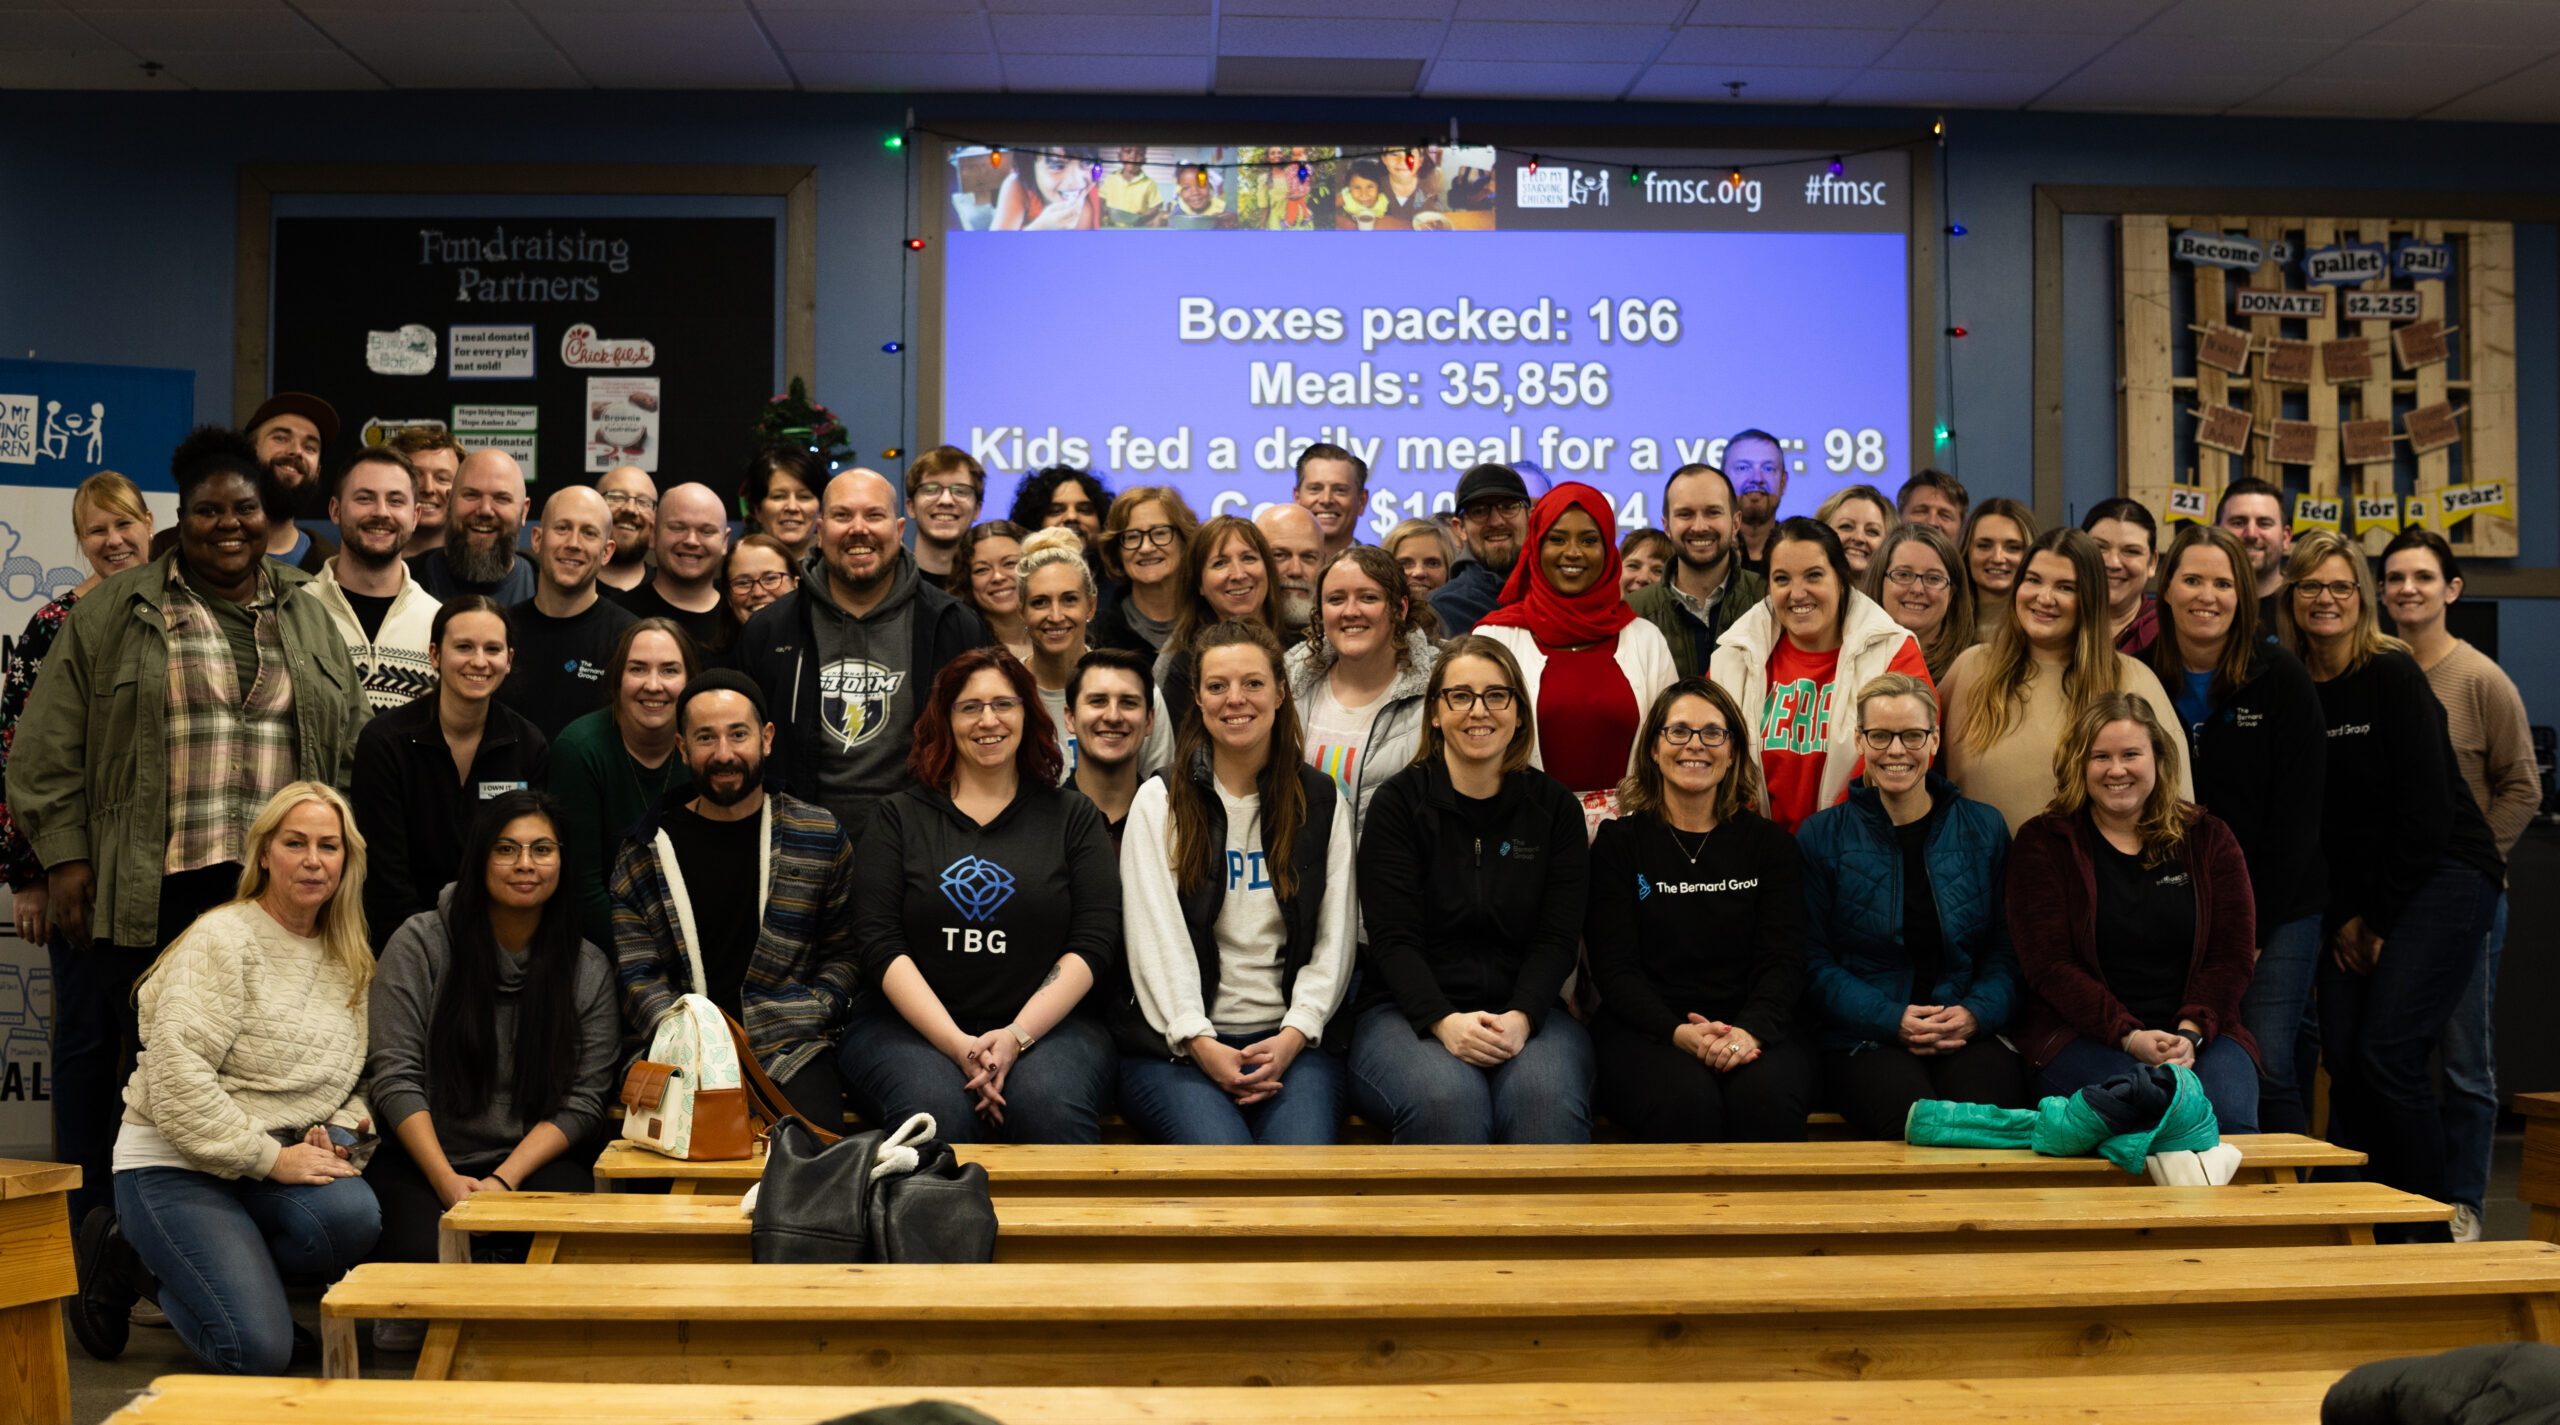 A group of people sitting and standing in rows in front of a screen that lists the number of boxes of food packed, meals and children fed at Feed My Starving Children.